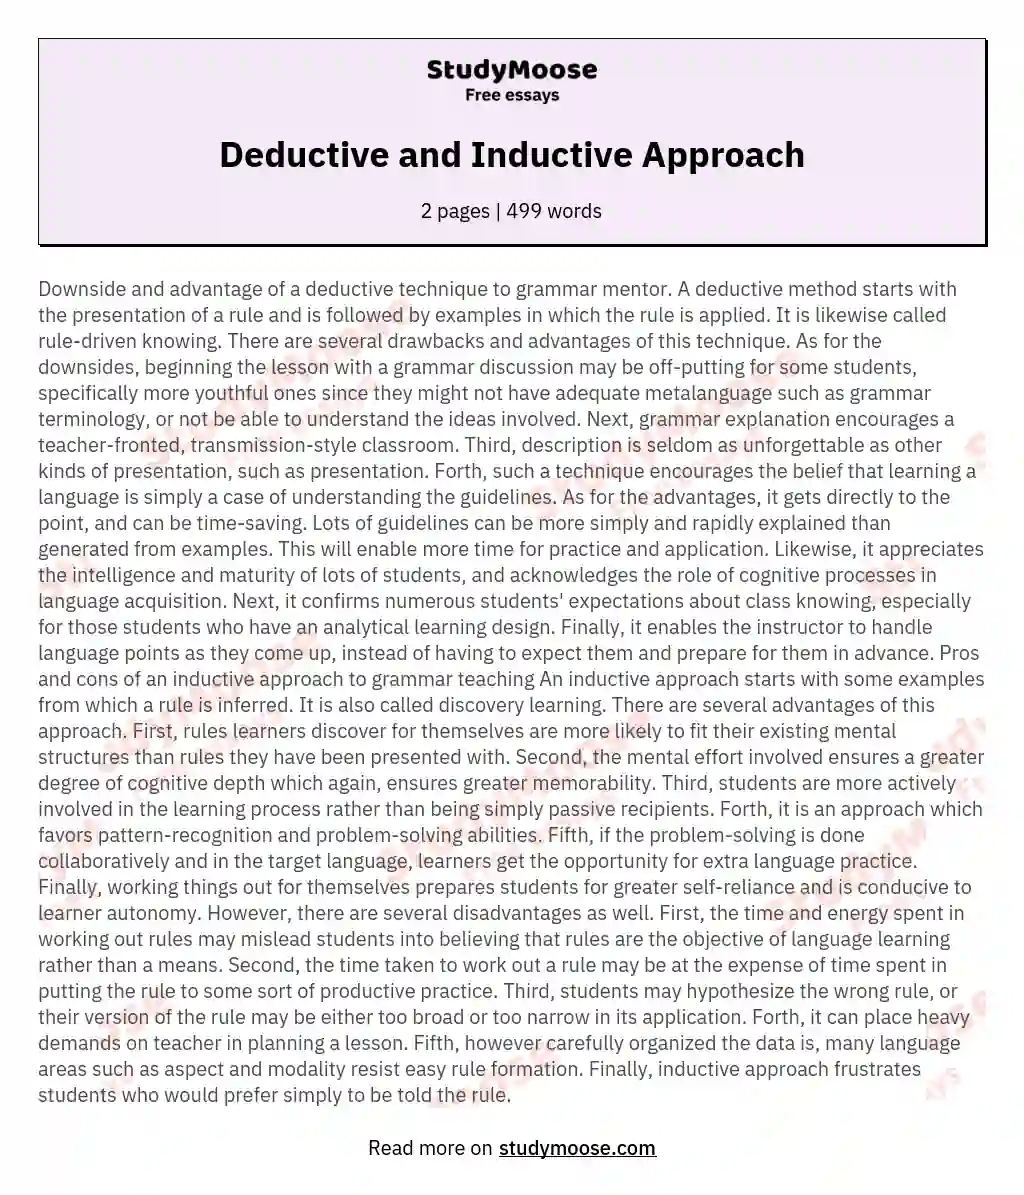 Deductive and Inductive Approach essay